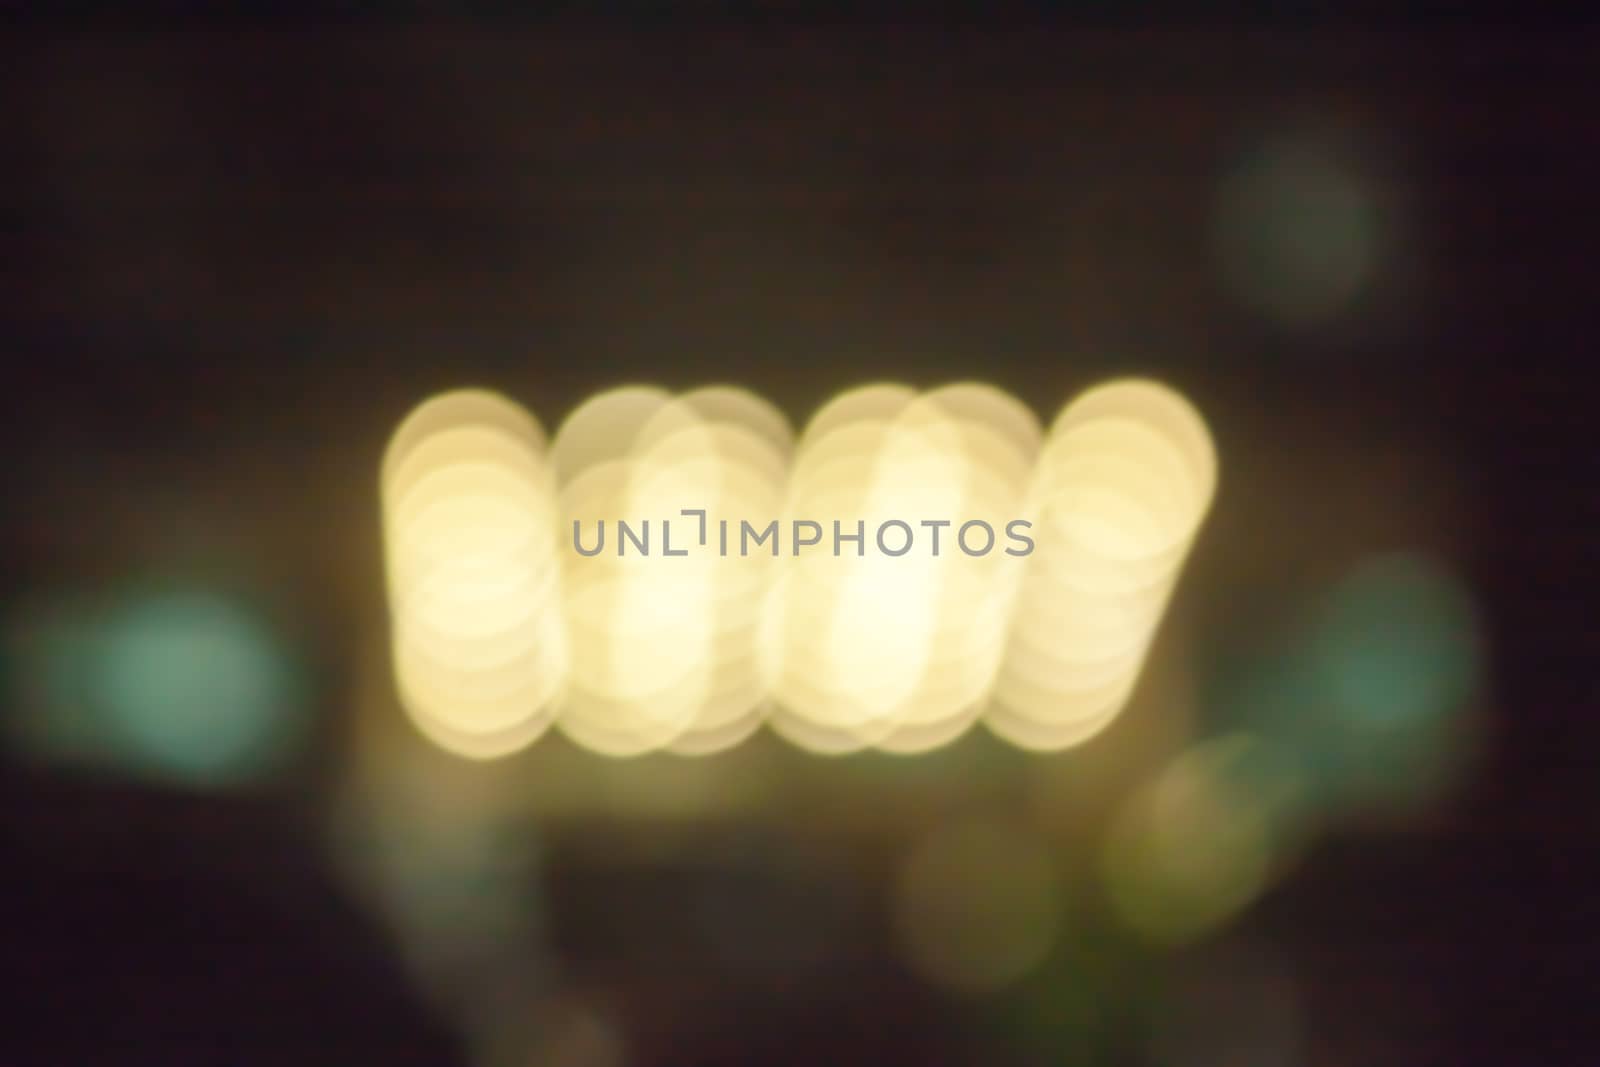 City night background in Kiev out of  focus